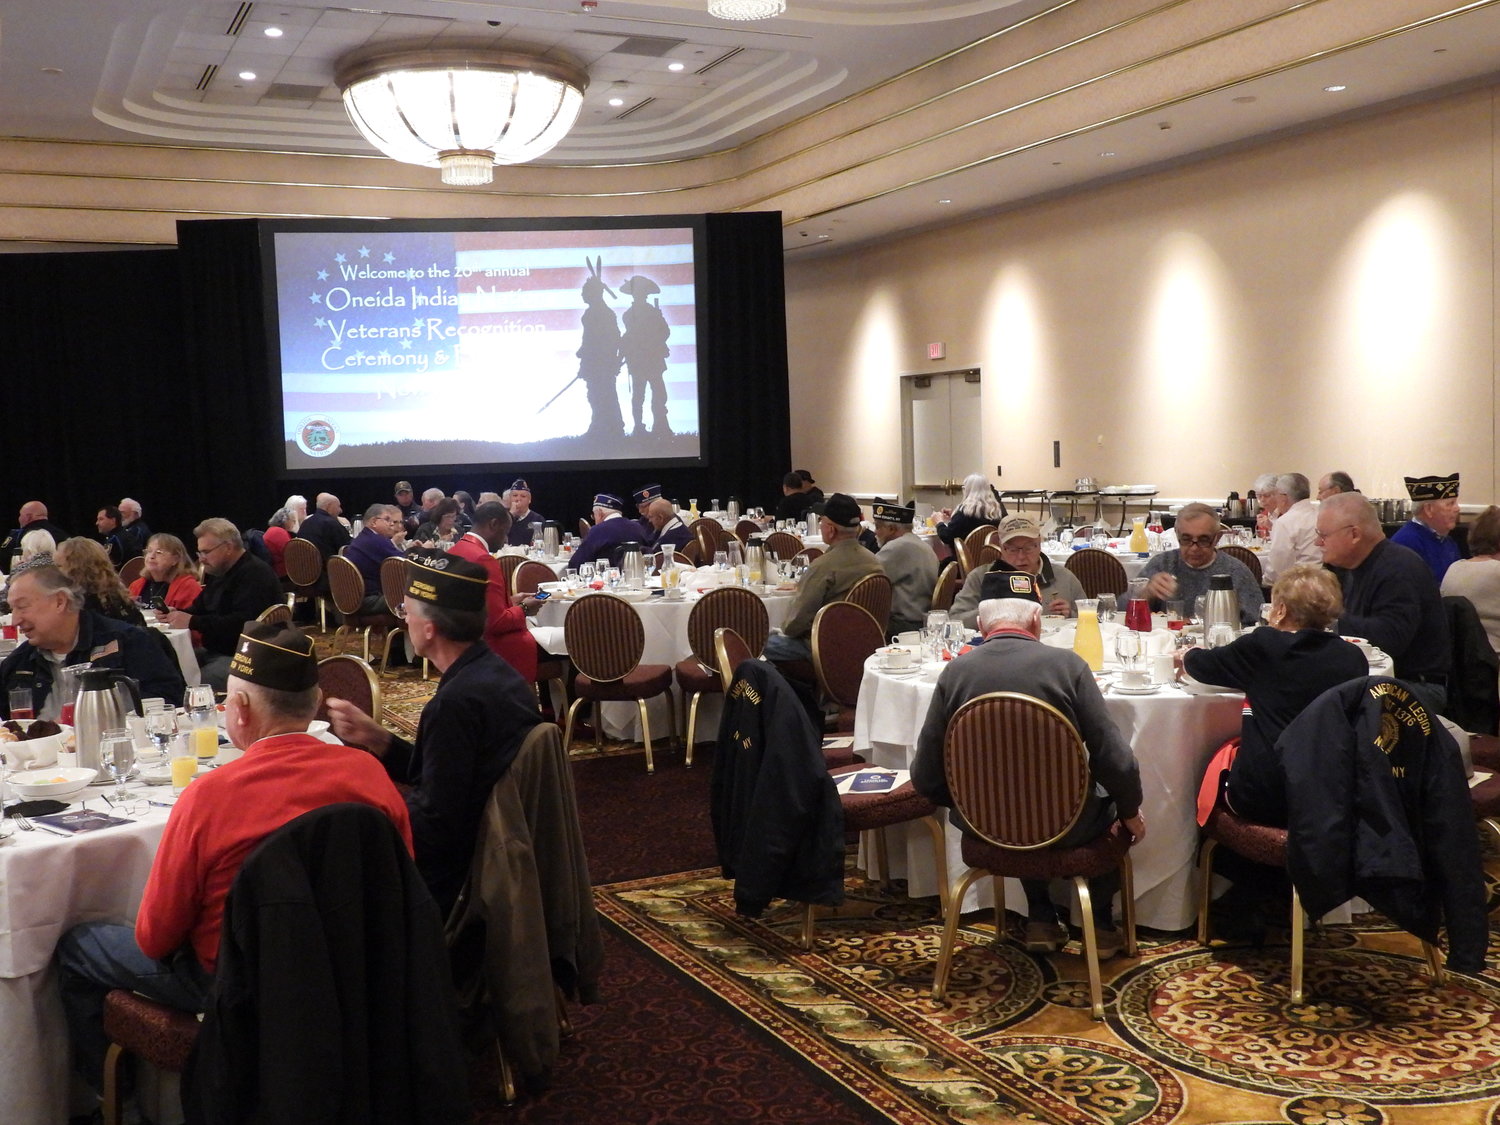 HAILING VETERANS — The Oneida Indian Nation hosts their 20th annual Veterans Recognition Ceremony and Breakfast, honoring veterans for their service and recognizing veterans amongst them.